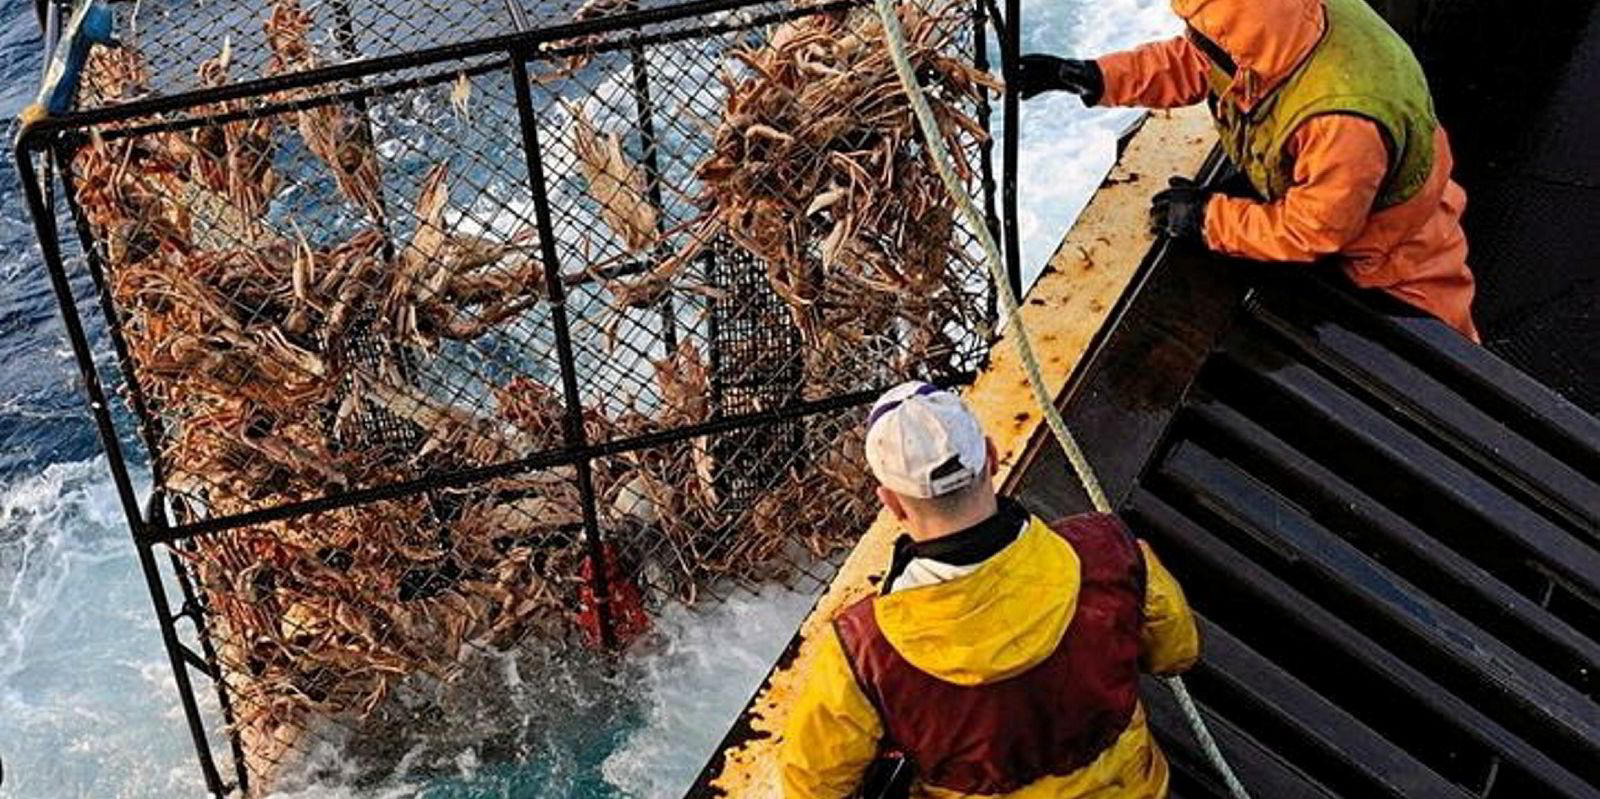 Lots of uncertainty': Significant Alaska snow crab harvests could be years  away, regulators say